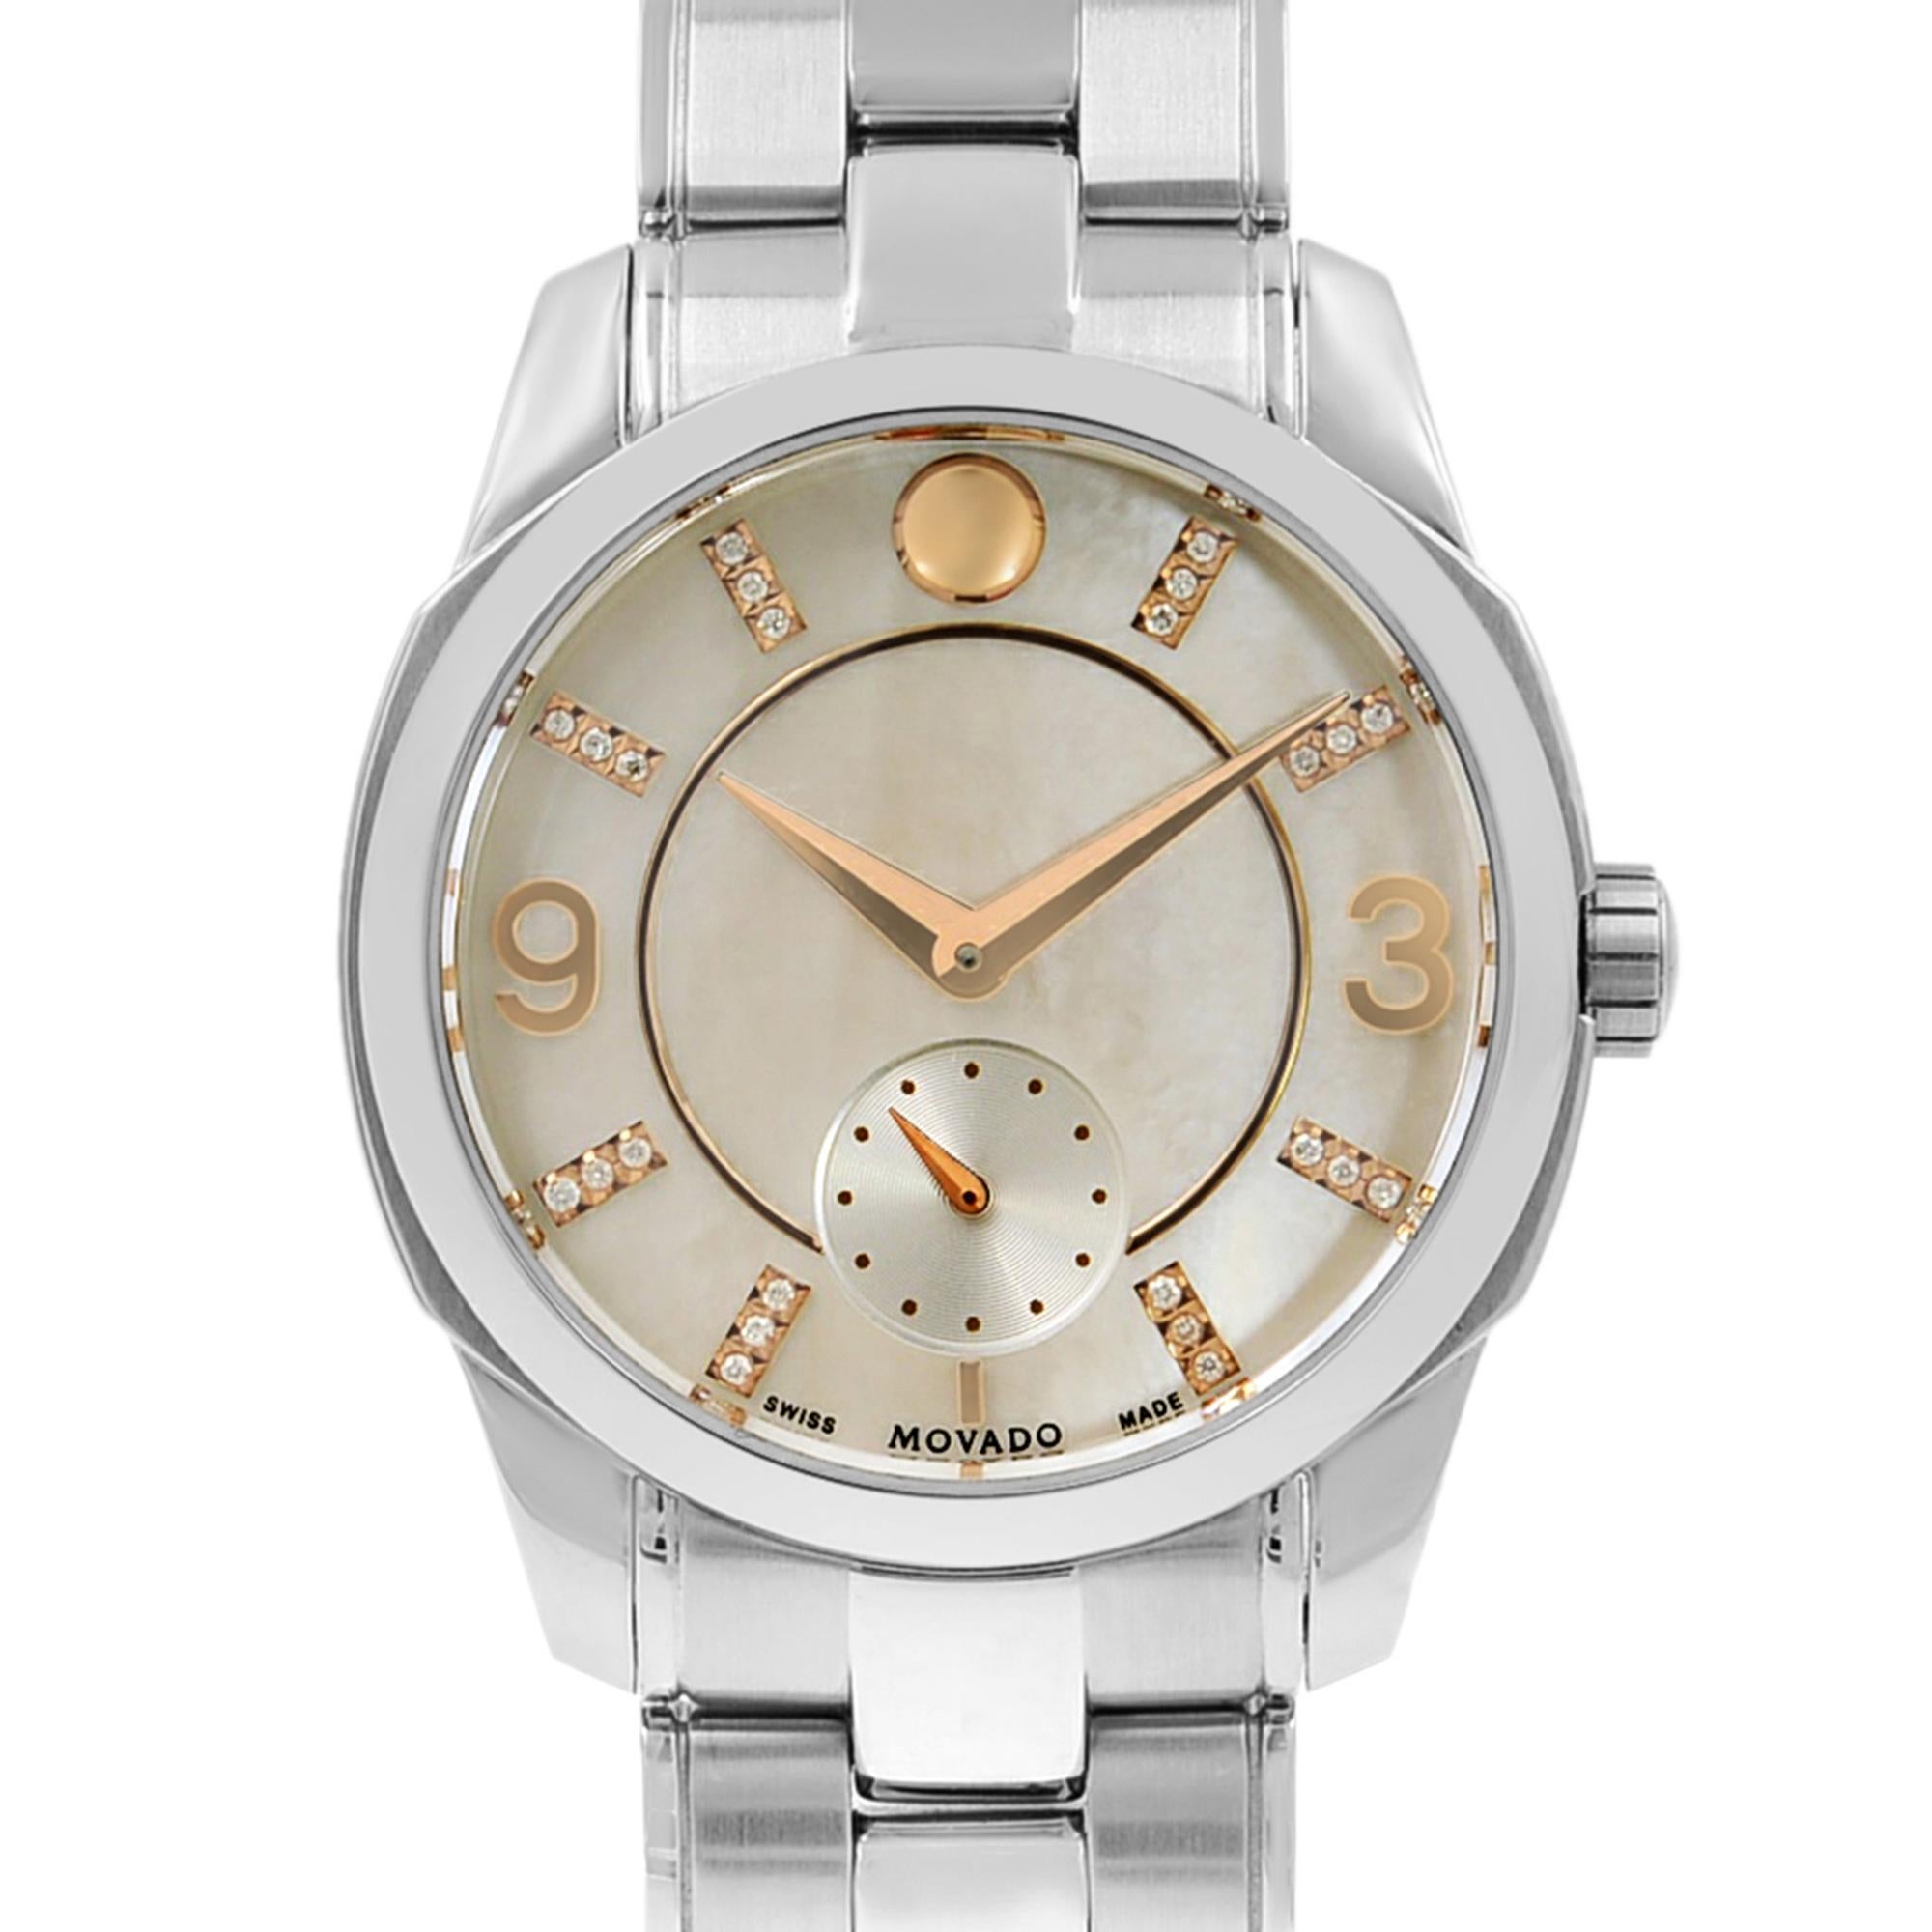 This pre-owned Movado LX 0606619 is a beautiful Ladie's timepiece that is powered by quartz (battery) movement which is cased in a stainless steel case. It has a round shape face, diamonds, small seconds subdial dial and has hand sticks & numerals